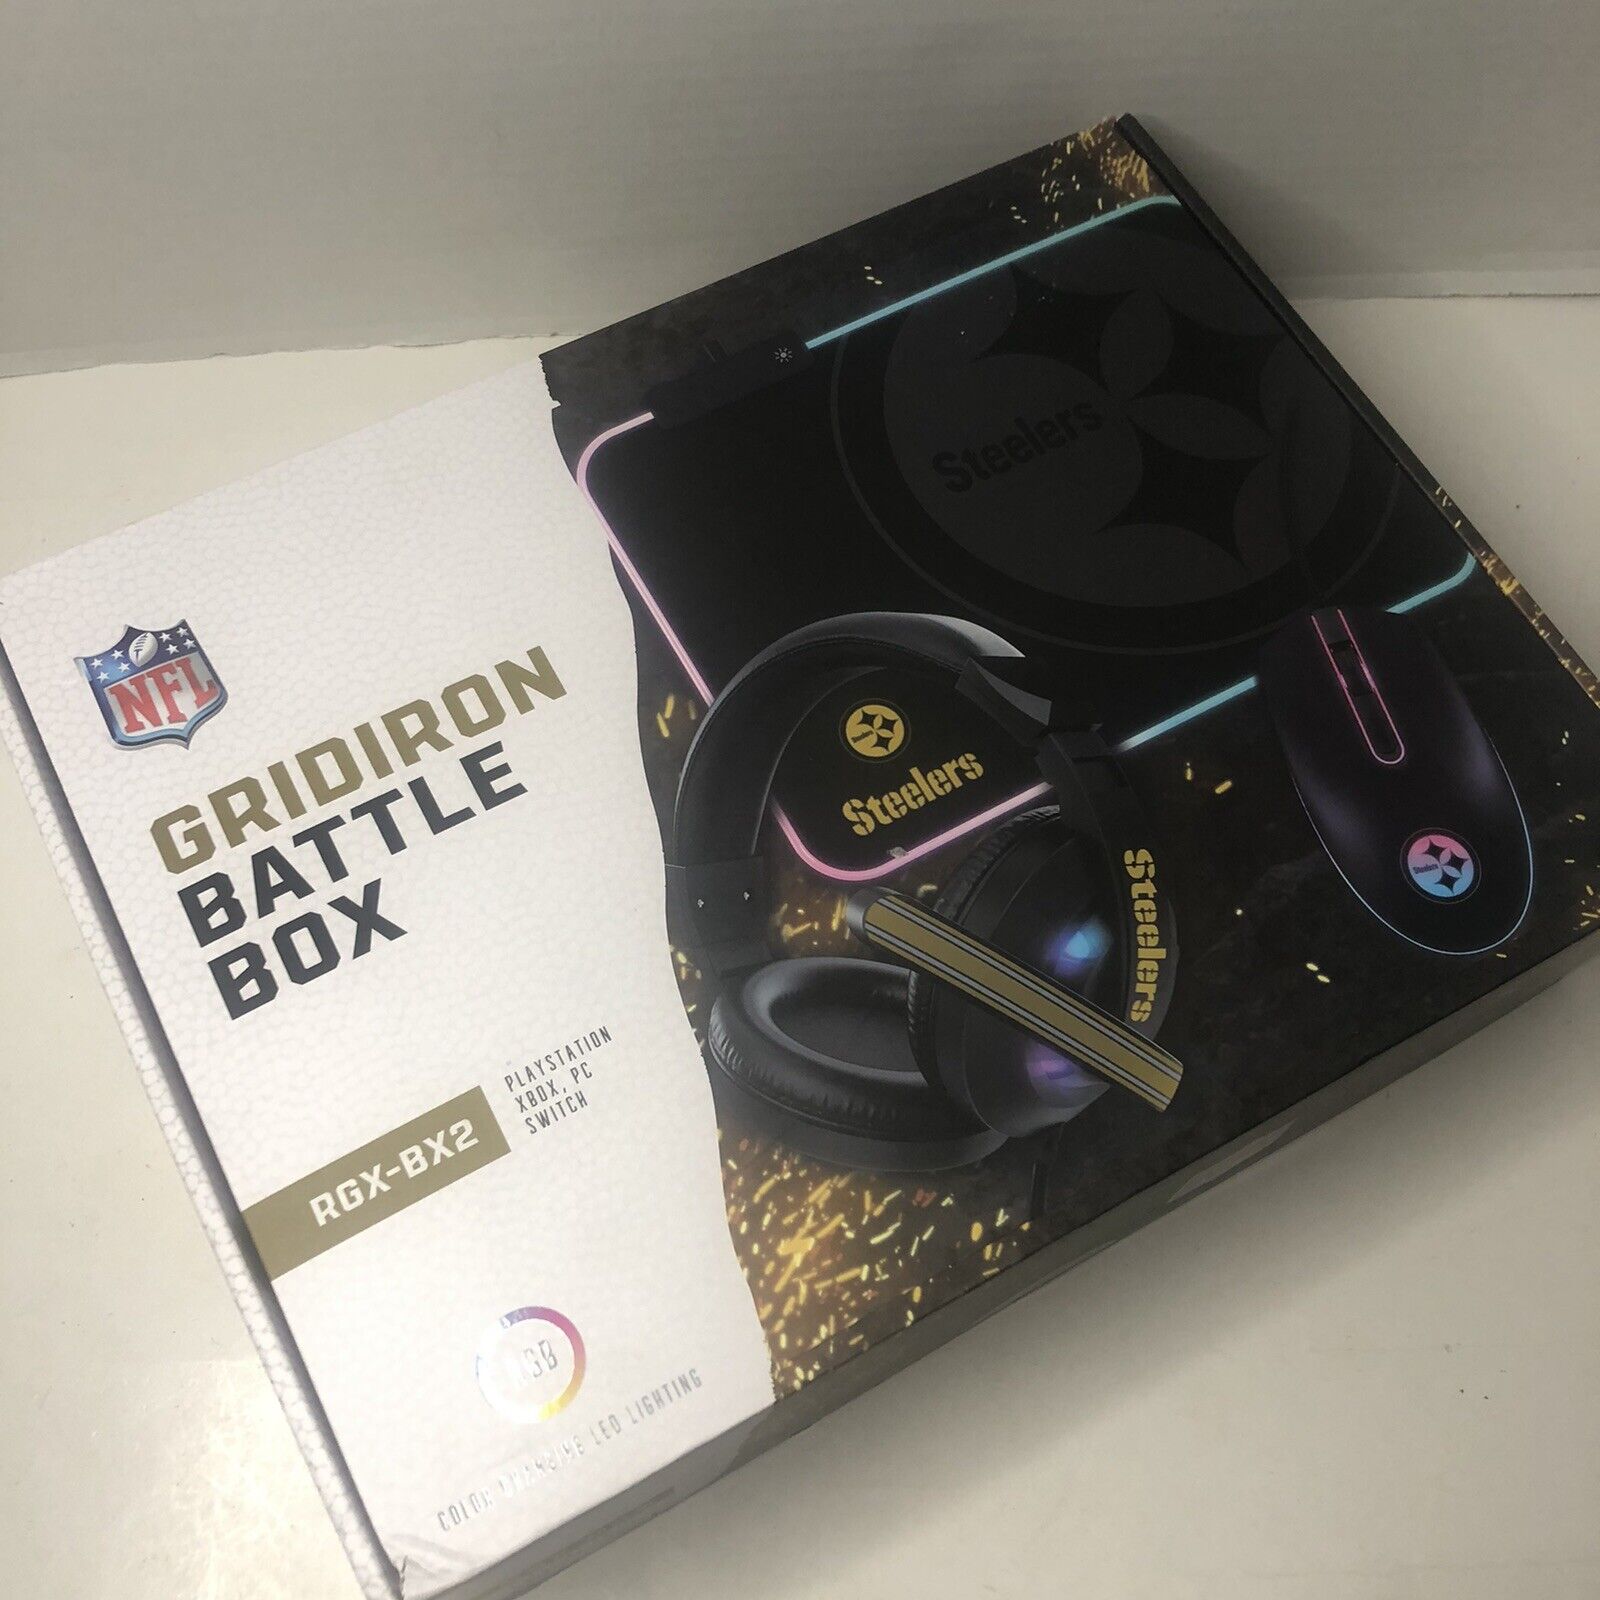 Pittsburgh Steelers NFL Gridiron Battle Box for PlayStation XBOX PC Switch New